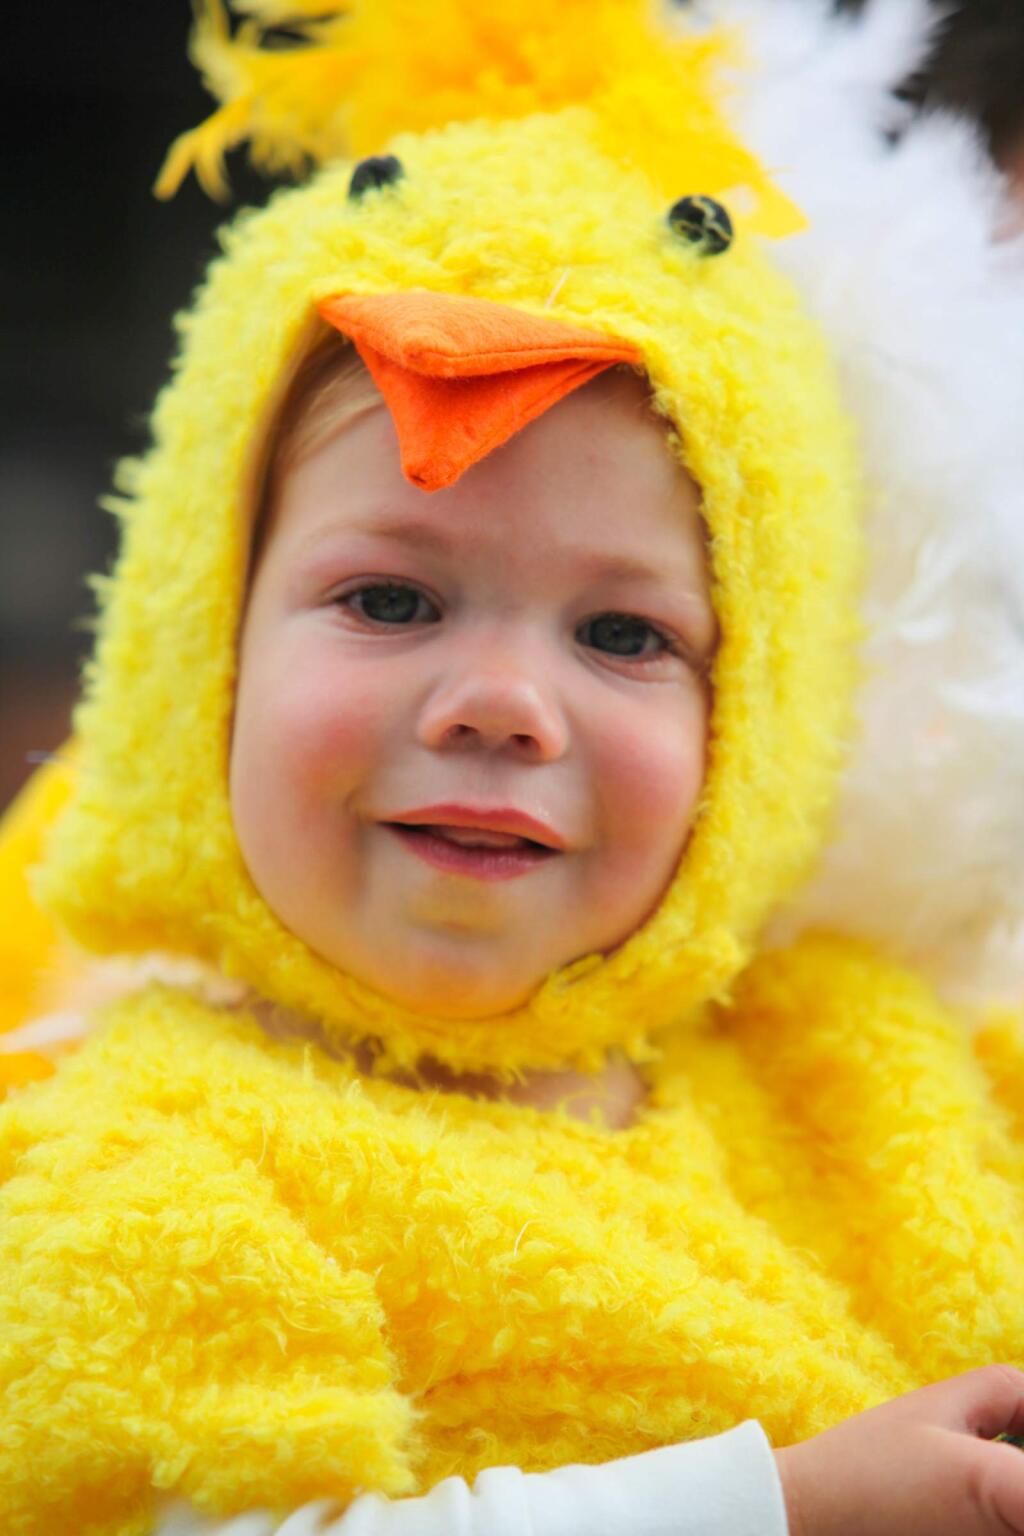 Carmela Geyer, 6 months, at The Cutest Little Chick In Town Contest held on Saturday, April 25, 2015. (Victoria Webb/For The Argus-Courier)